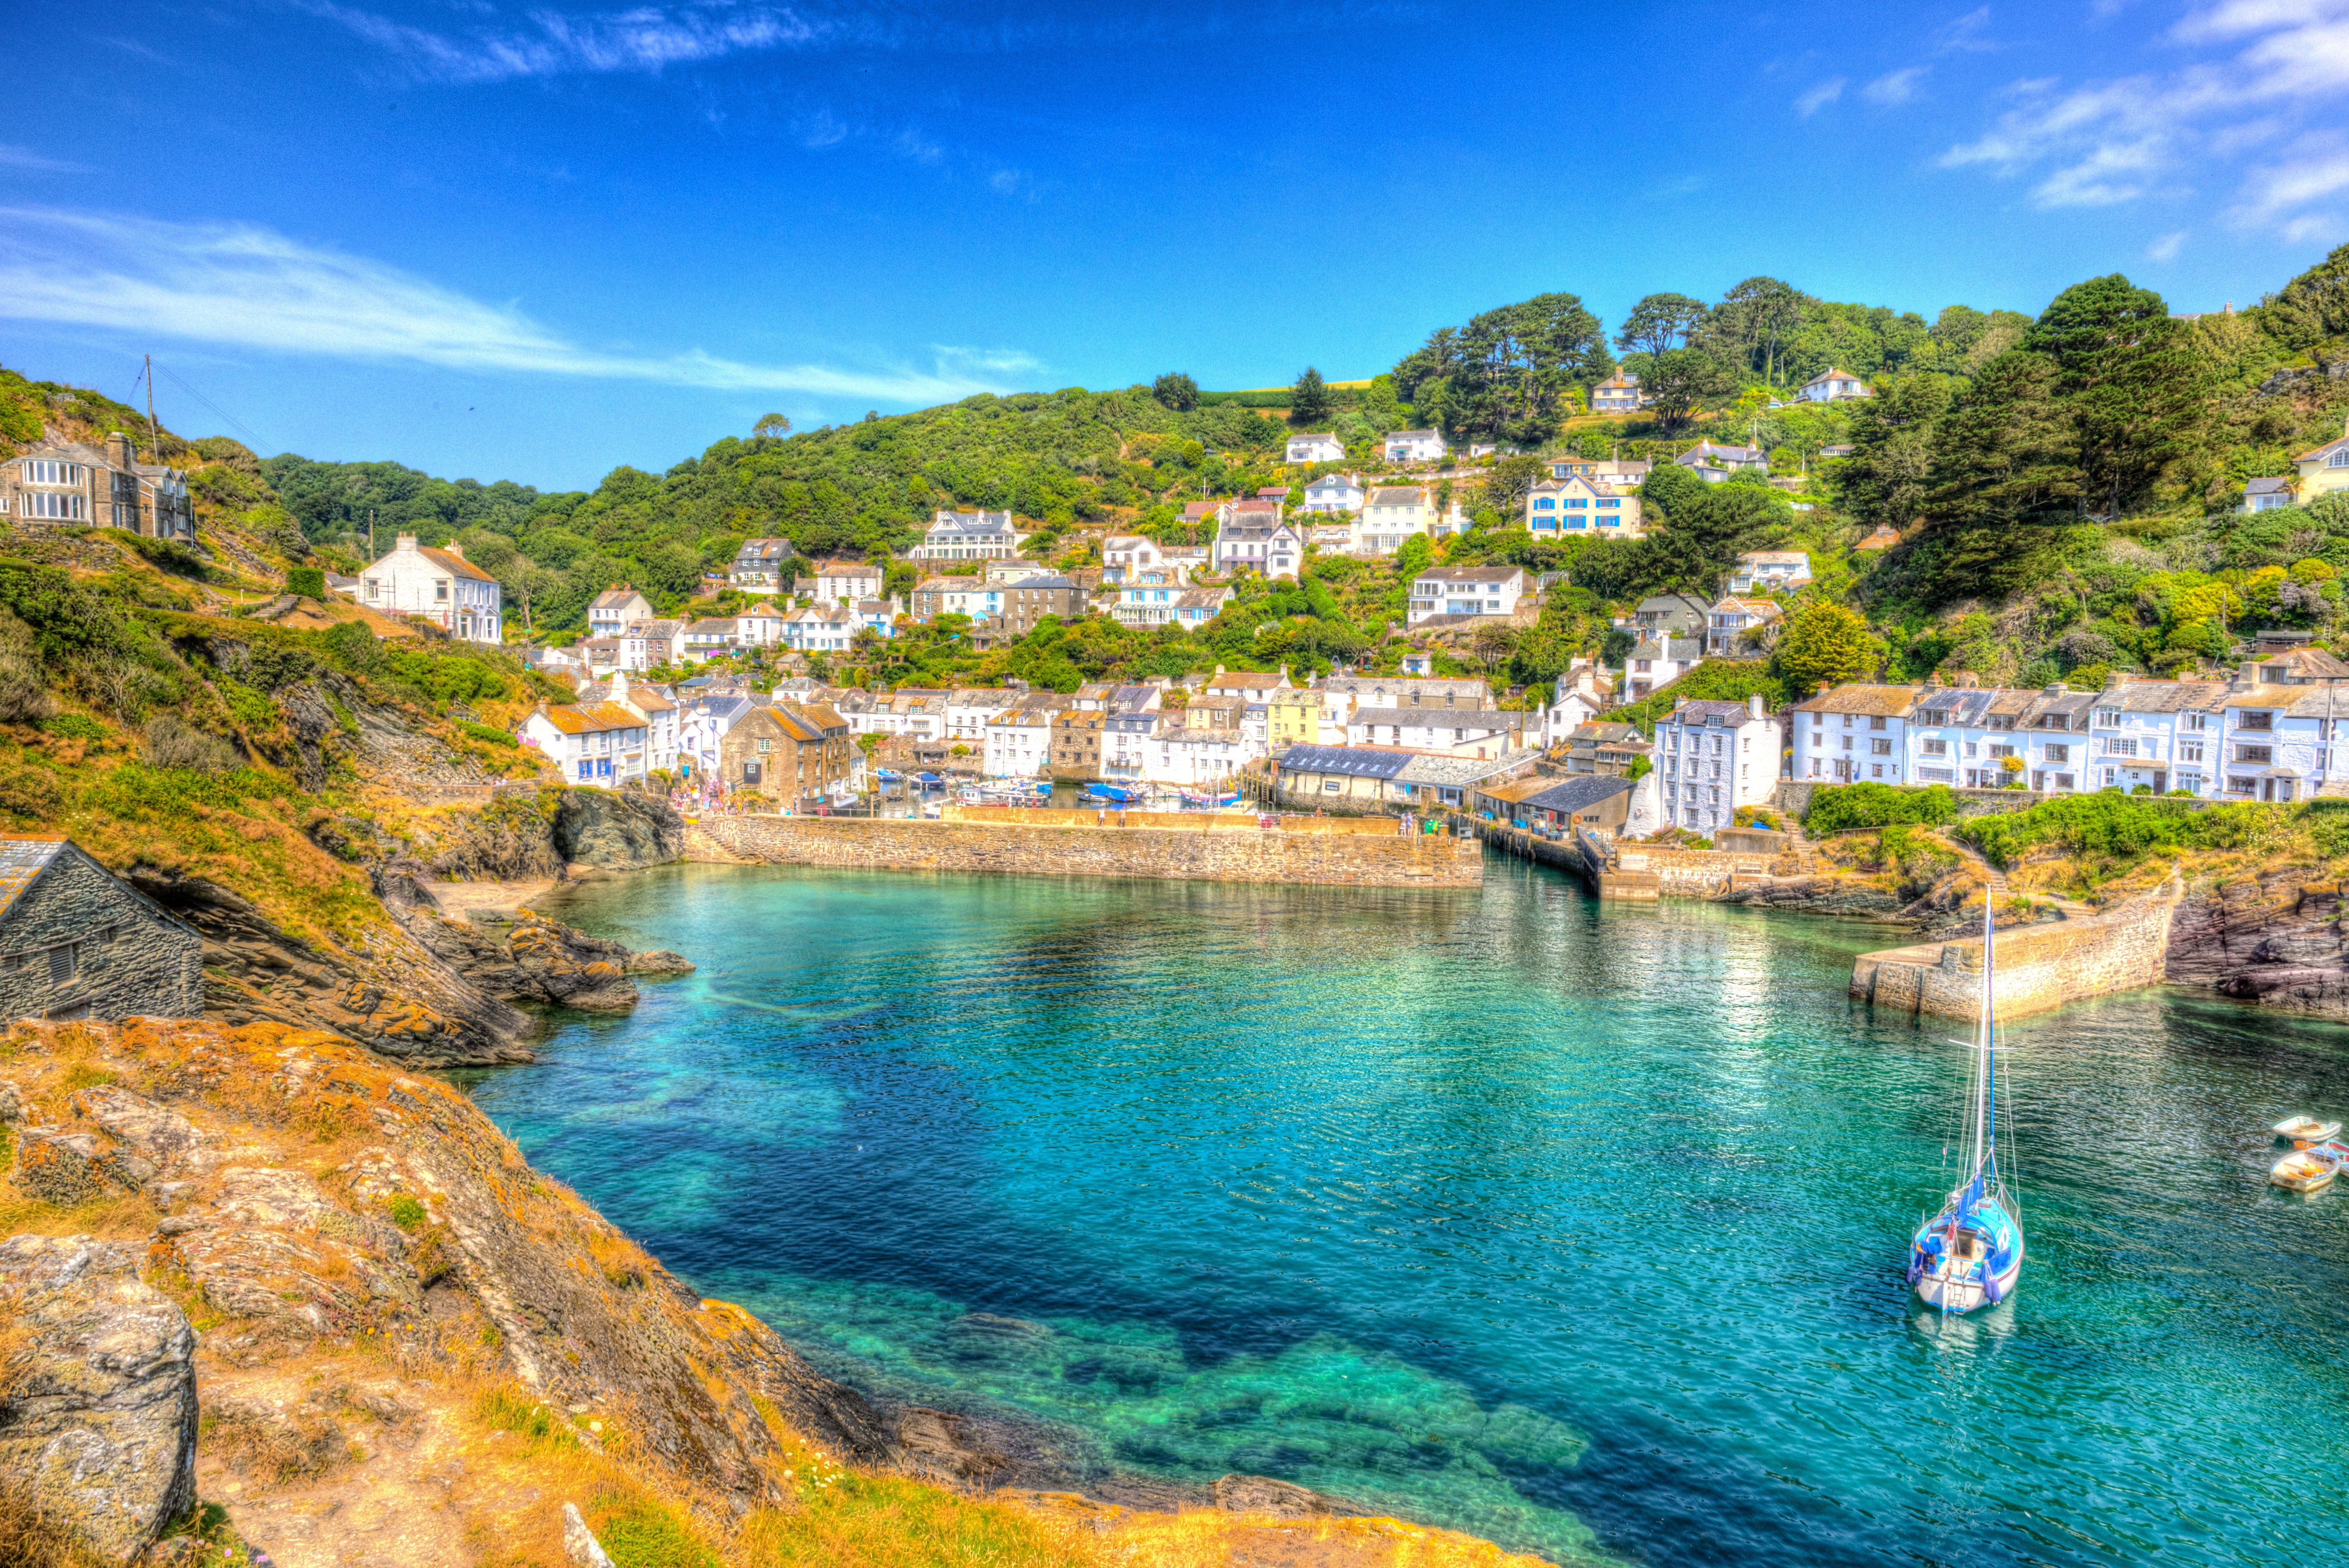 Cornwall is popular with tourists